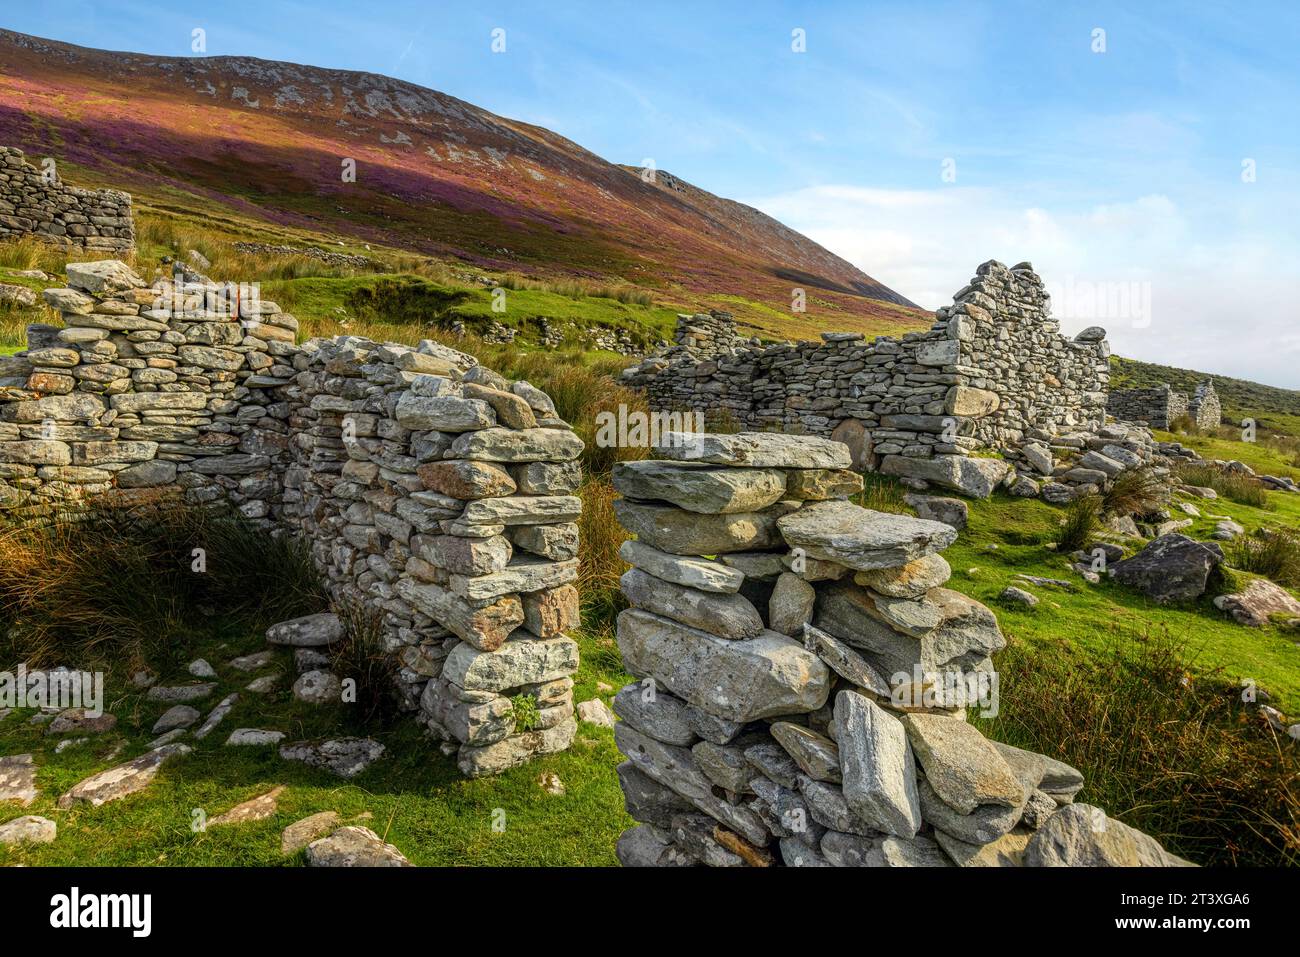 Slievemore Deserted Village is a protected archaeological site and a popular tourist destination, offering visitors a glimpse into traditional Irish l Stock Photo